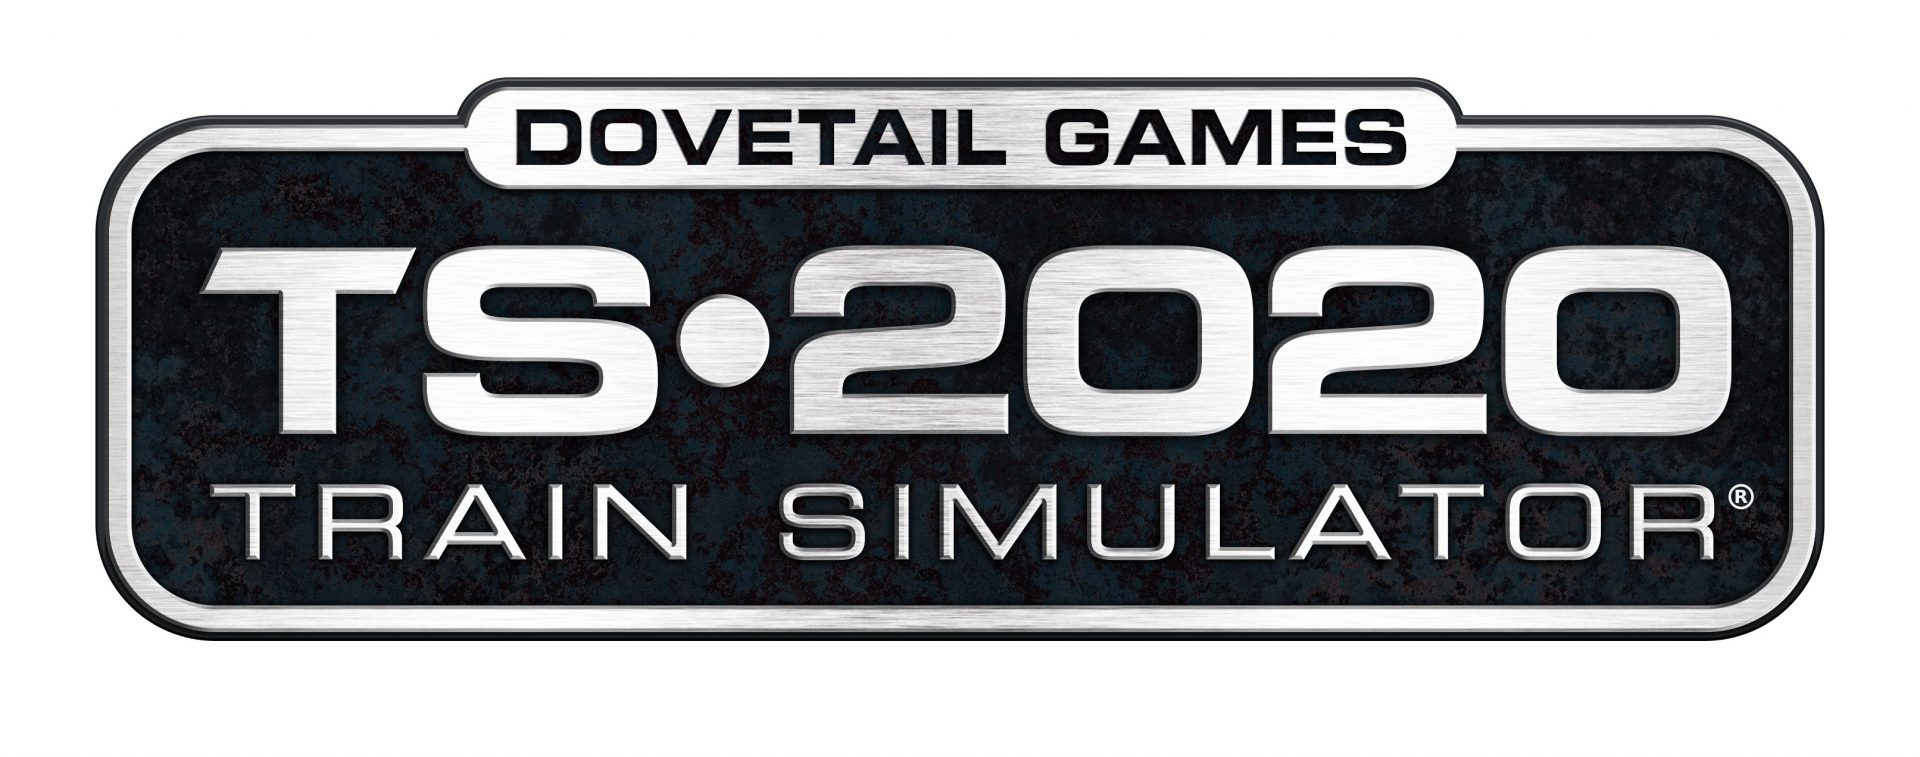 Train Simulator 2020 Is Coming To Steam On September 19th